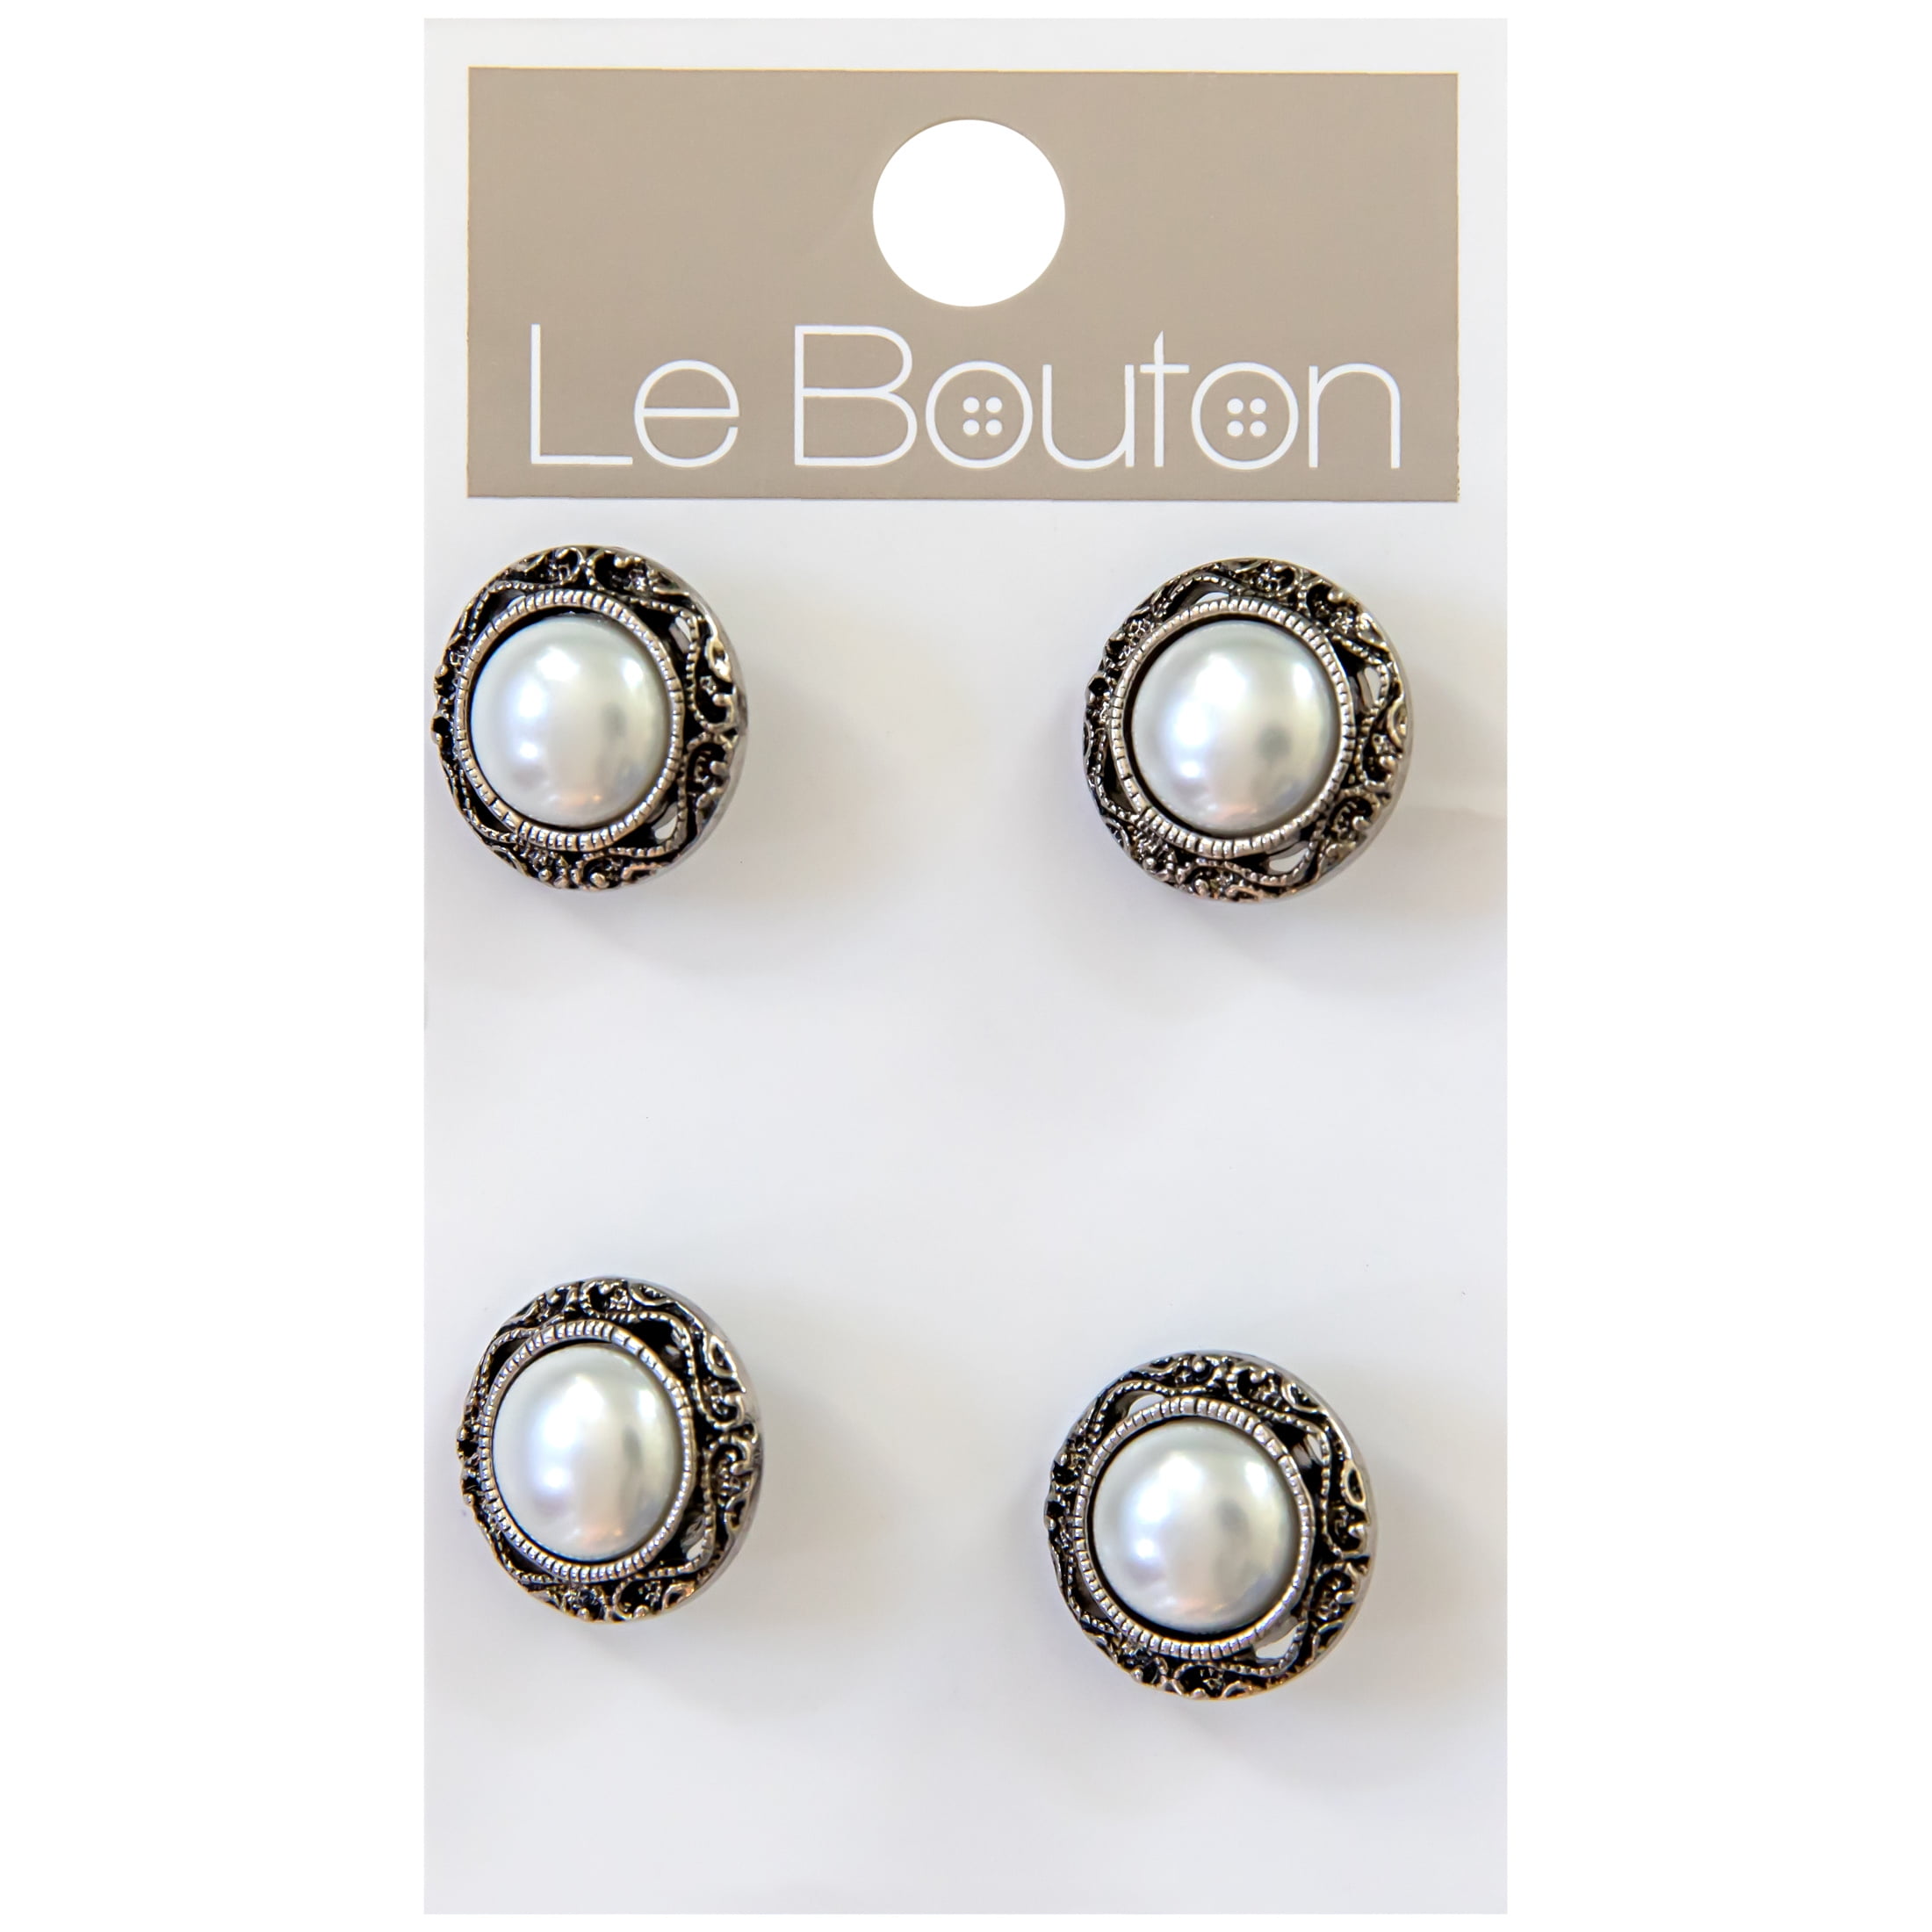 Le Bouton Antique Silver 5/8" Small Pearl Shank Buttons, 4 Pieces